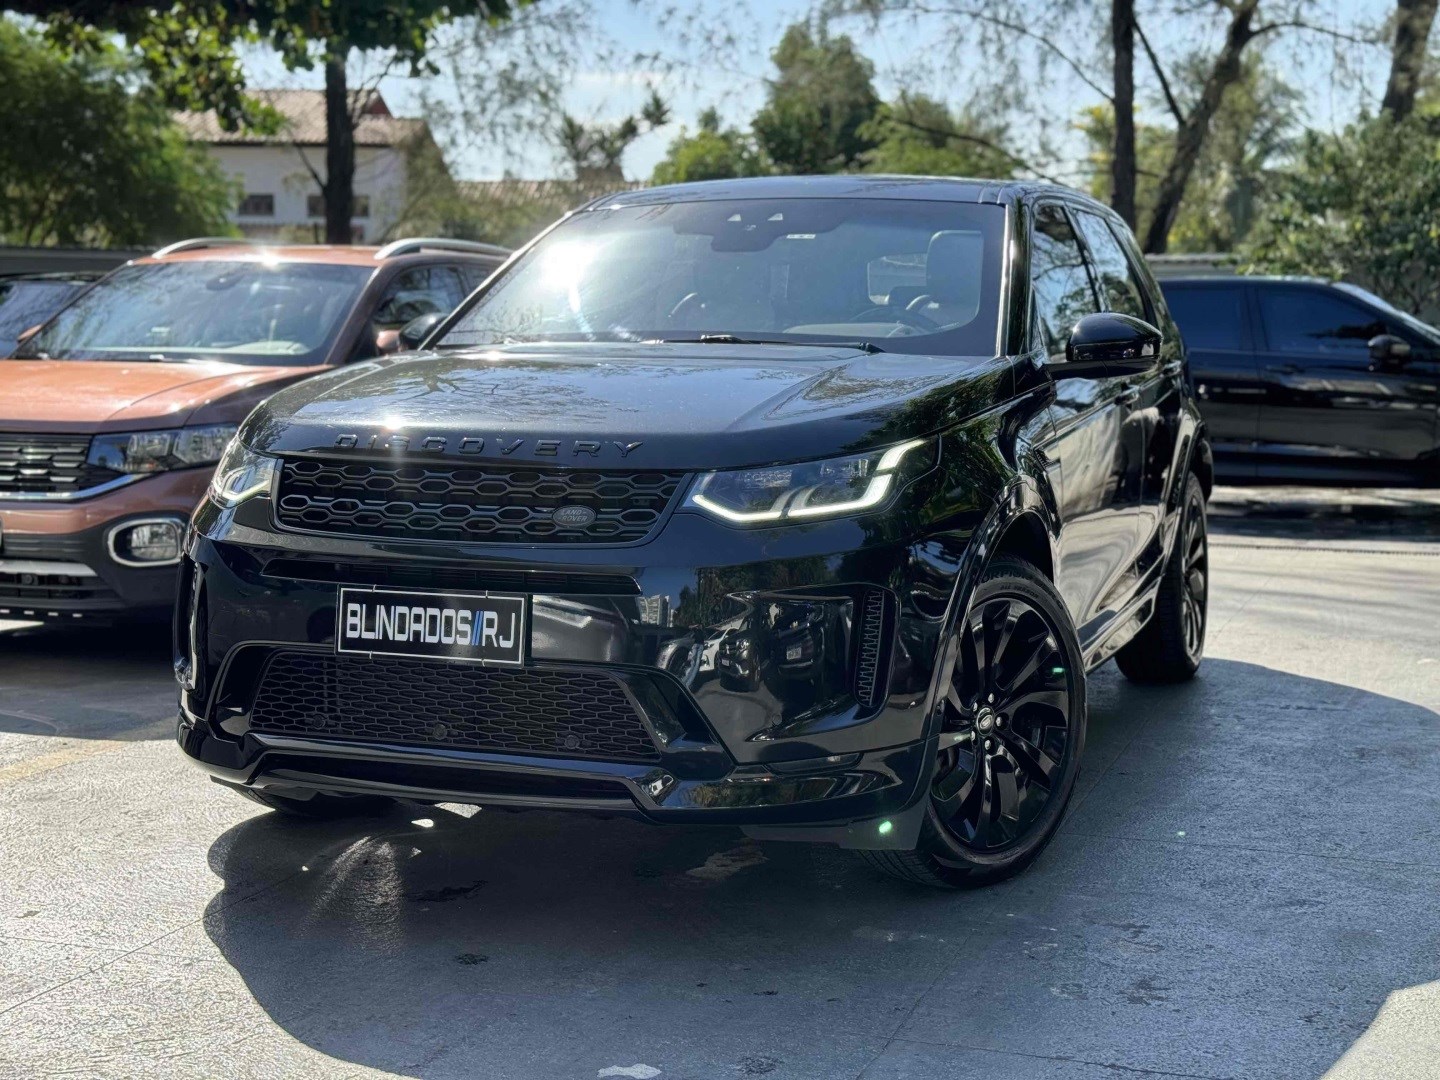 LAND ROVER DISCOVERY SPORT 2.0 D180 TURBO DIESEL R-DYNAMIC SE AUTOMÁTICO